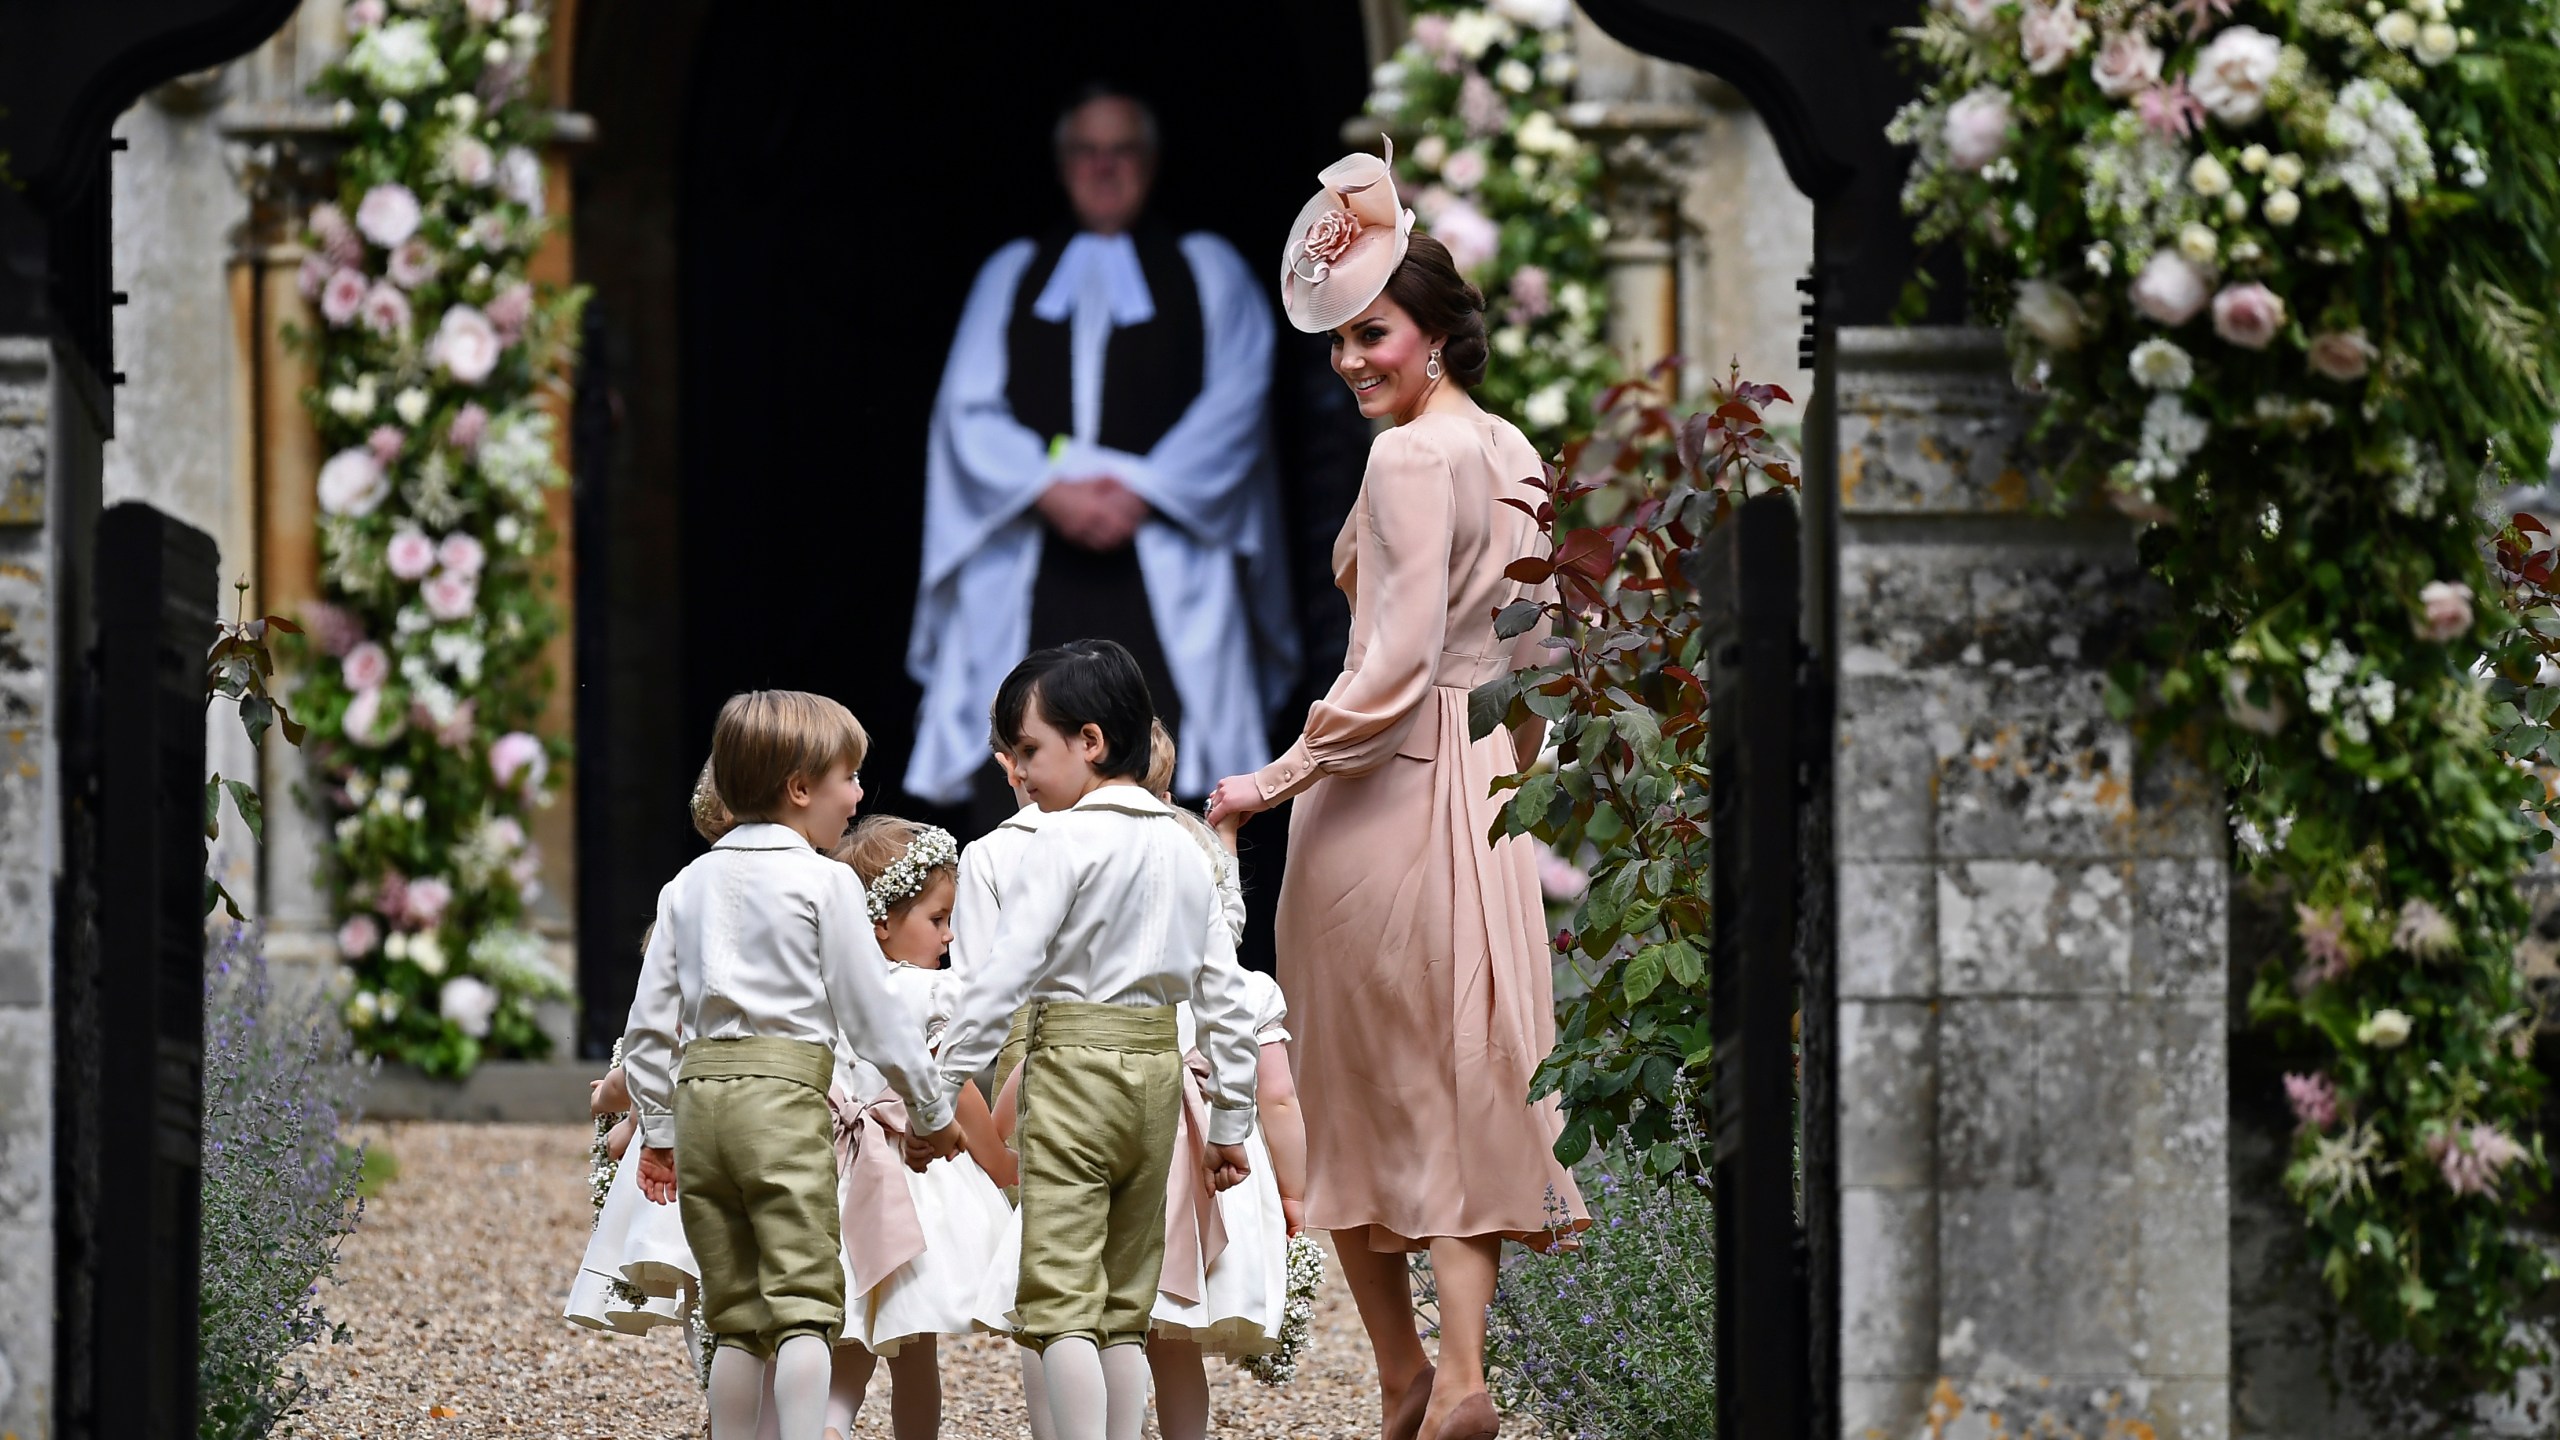 Britain's Catherine, Duchess of Cambridge, right, walks with the bridesmaids and pageboys as they arrive for her sister Pippa Middleton's wedding to James Matthews, at St Mark's Church in Englefield, England, Saturday, May 20, 2017. (Justin Tallis/Pool Photo via AP, File)